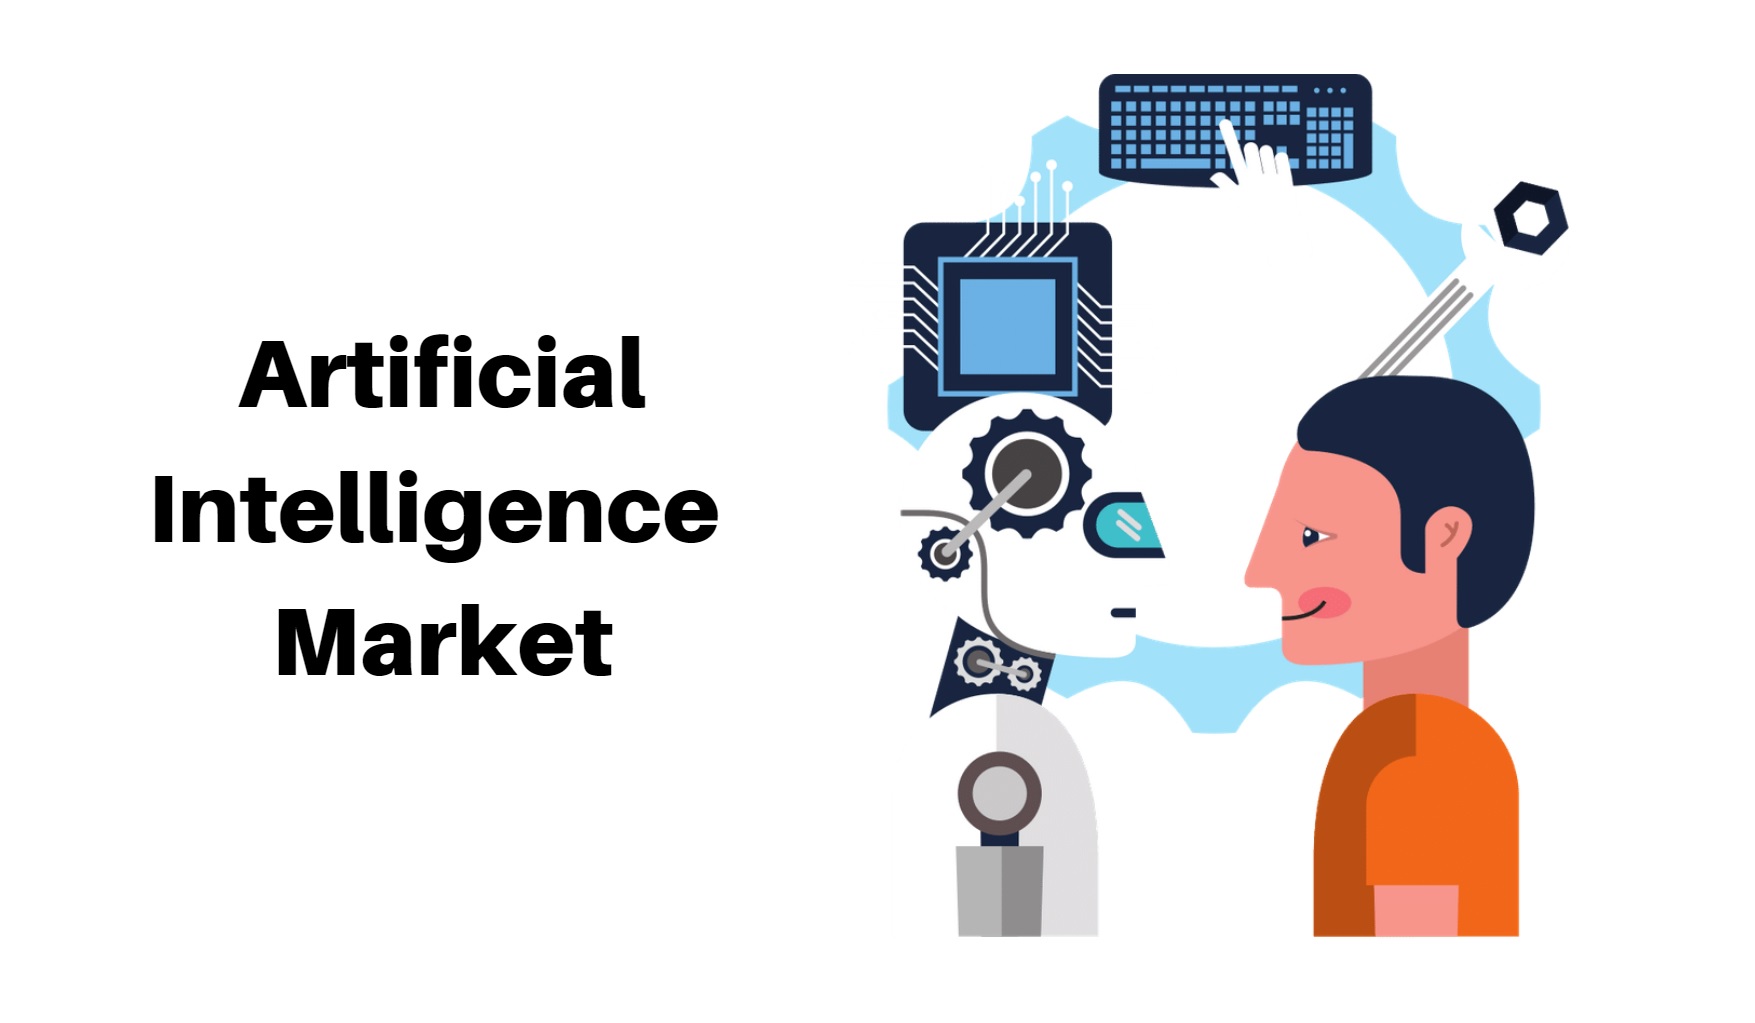 Global Artificial Intelligence Market will anticipate around USD 4173.64 Bn by 2033